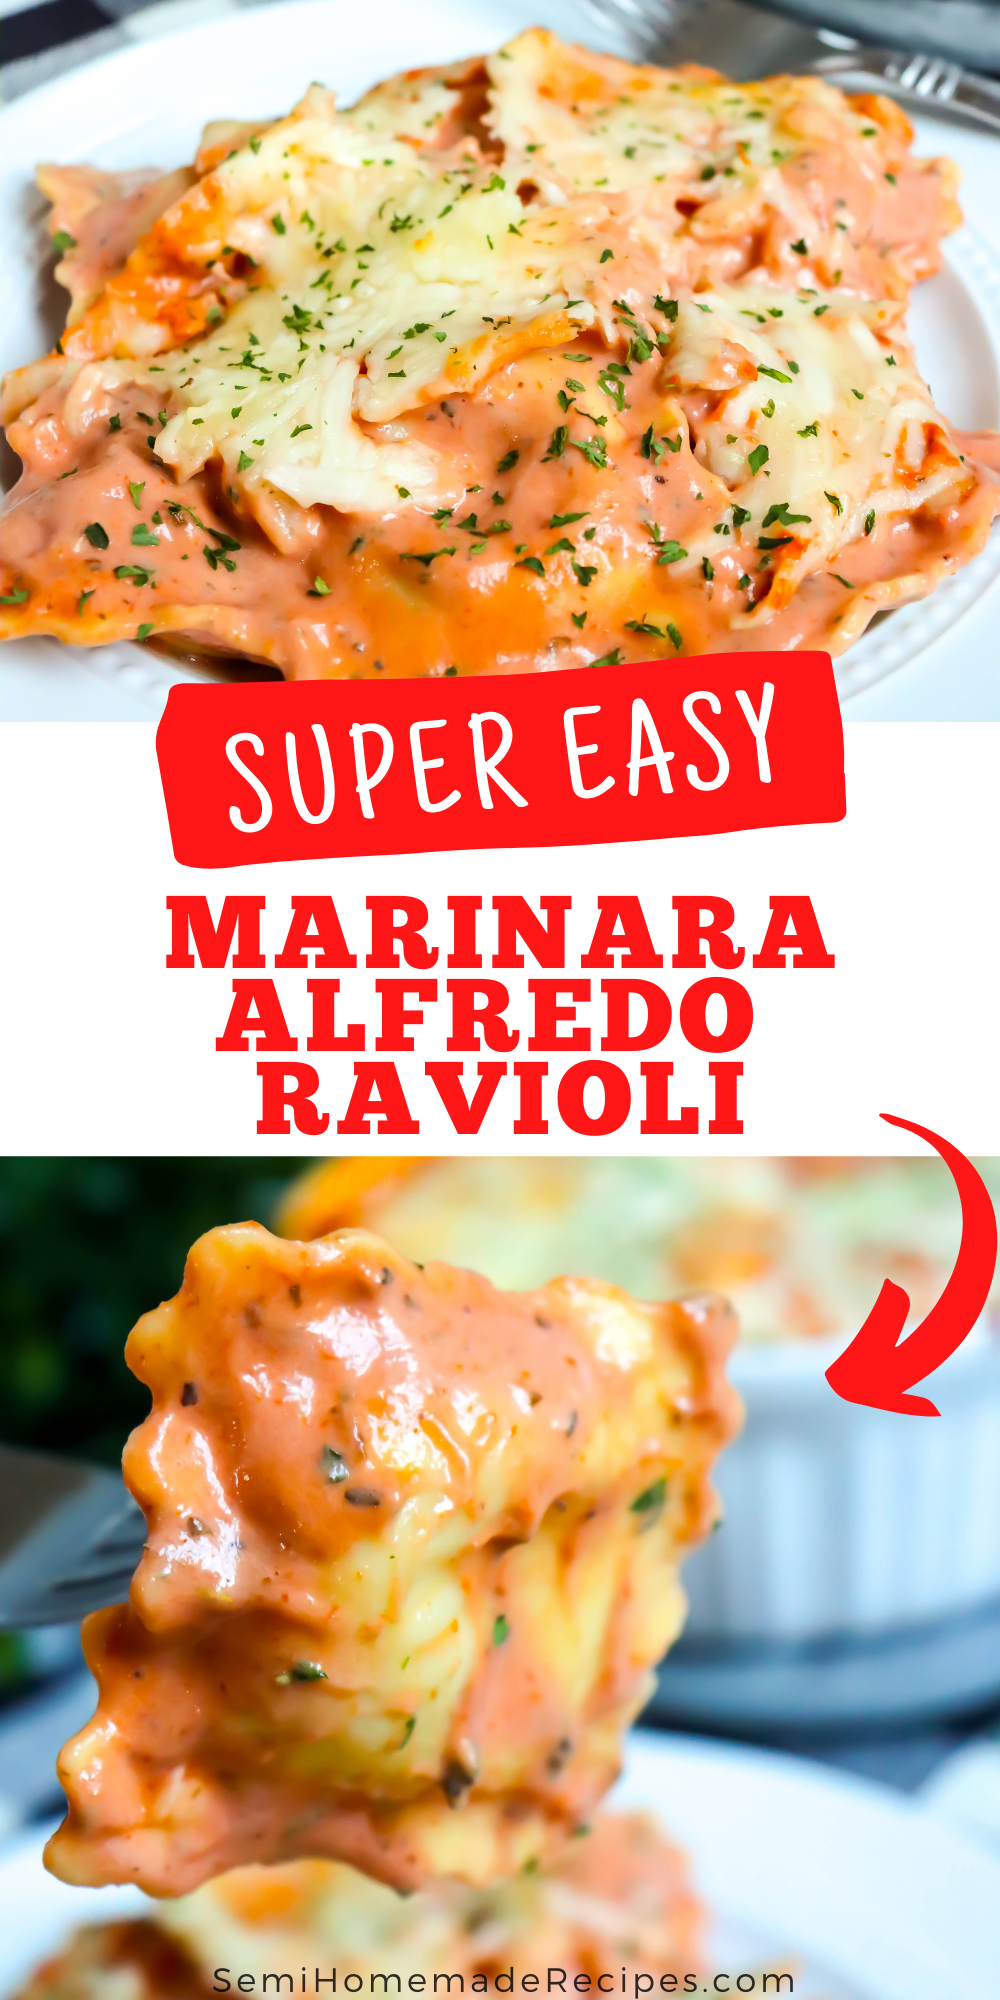 Marinara Alfredo Ravioli - a quick and easy meal with refrigerated cheese stuffed ravioli, marinara sauce, alfredo sauce and lots of mozzarella cheese. Great for busy weeknight or lazy weekend!